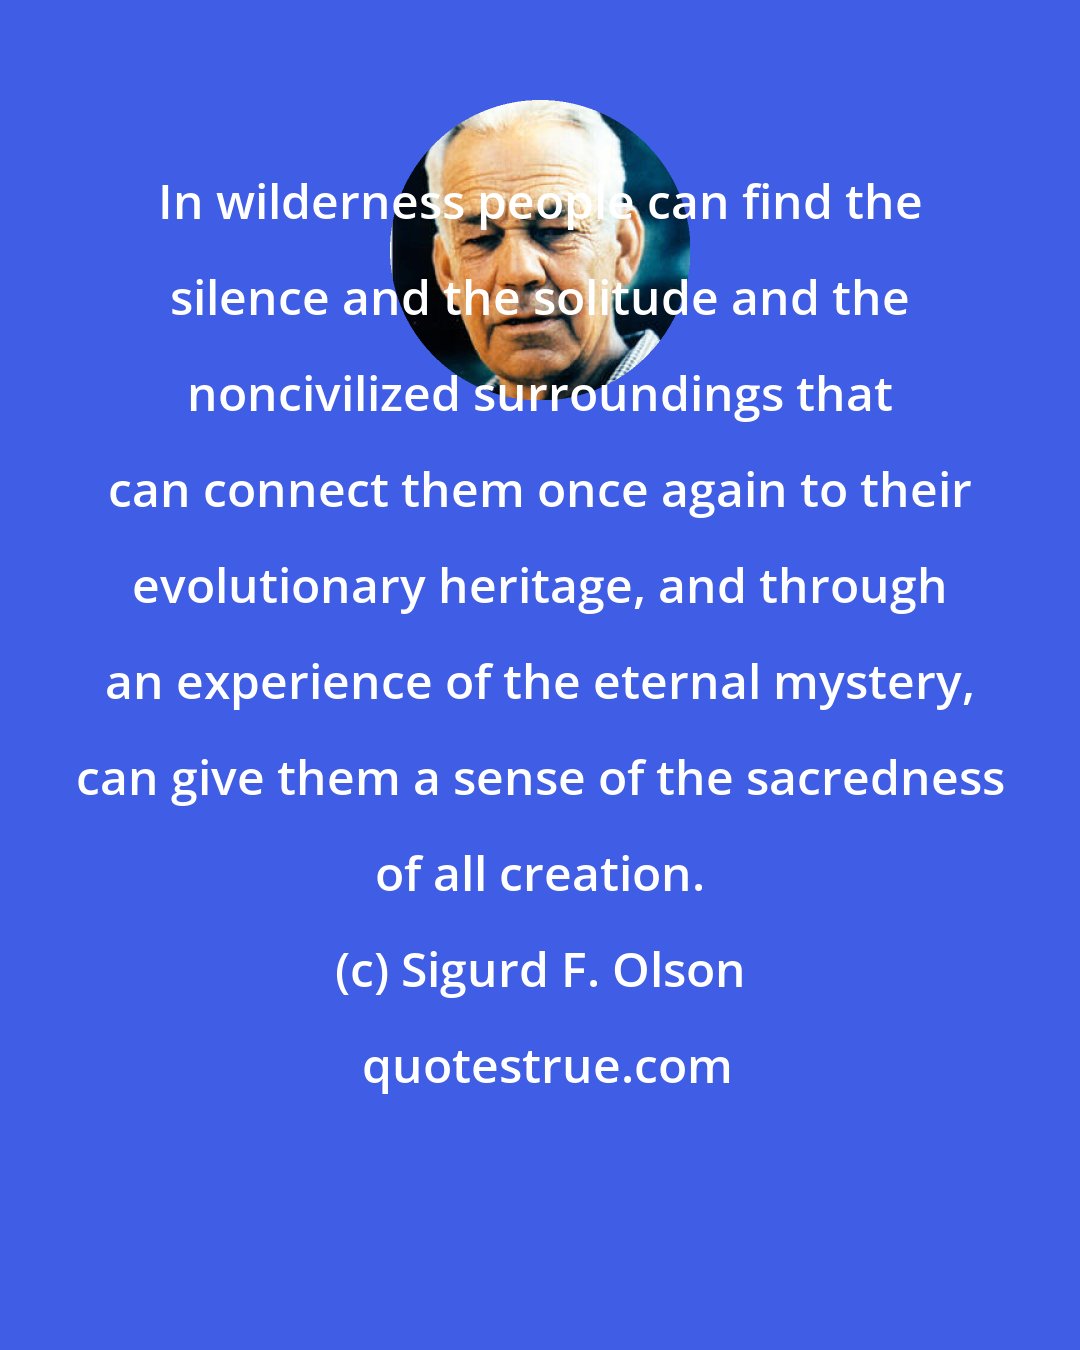 Sigurd F. Olson: In wilderness people can find the silence and the solitude and the noncivilized surroundings that can connect them once again to their evolutionary heritage, and through an experience of the eternal mystery, can give them a sense of the sacredness of all creation.